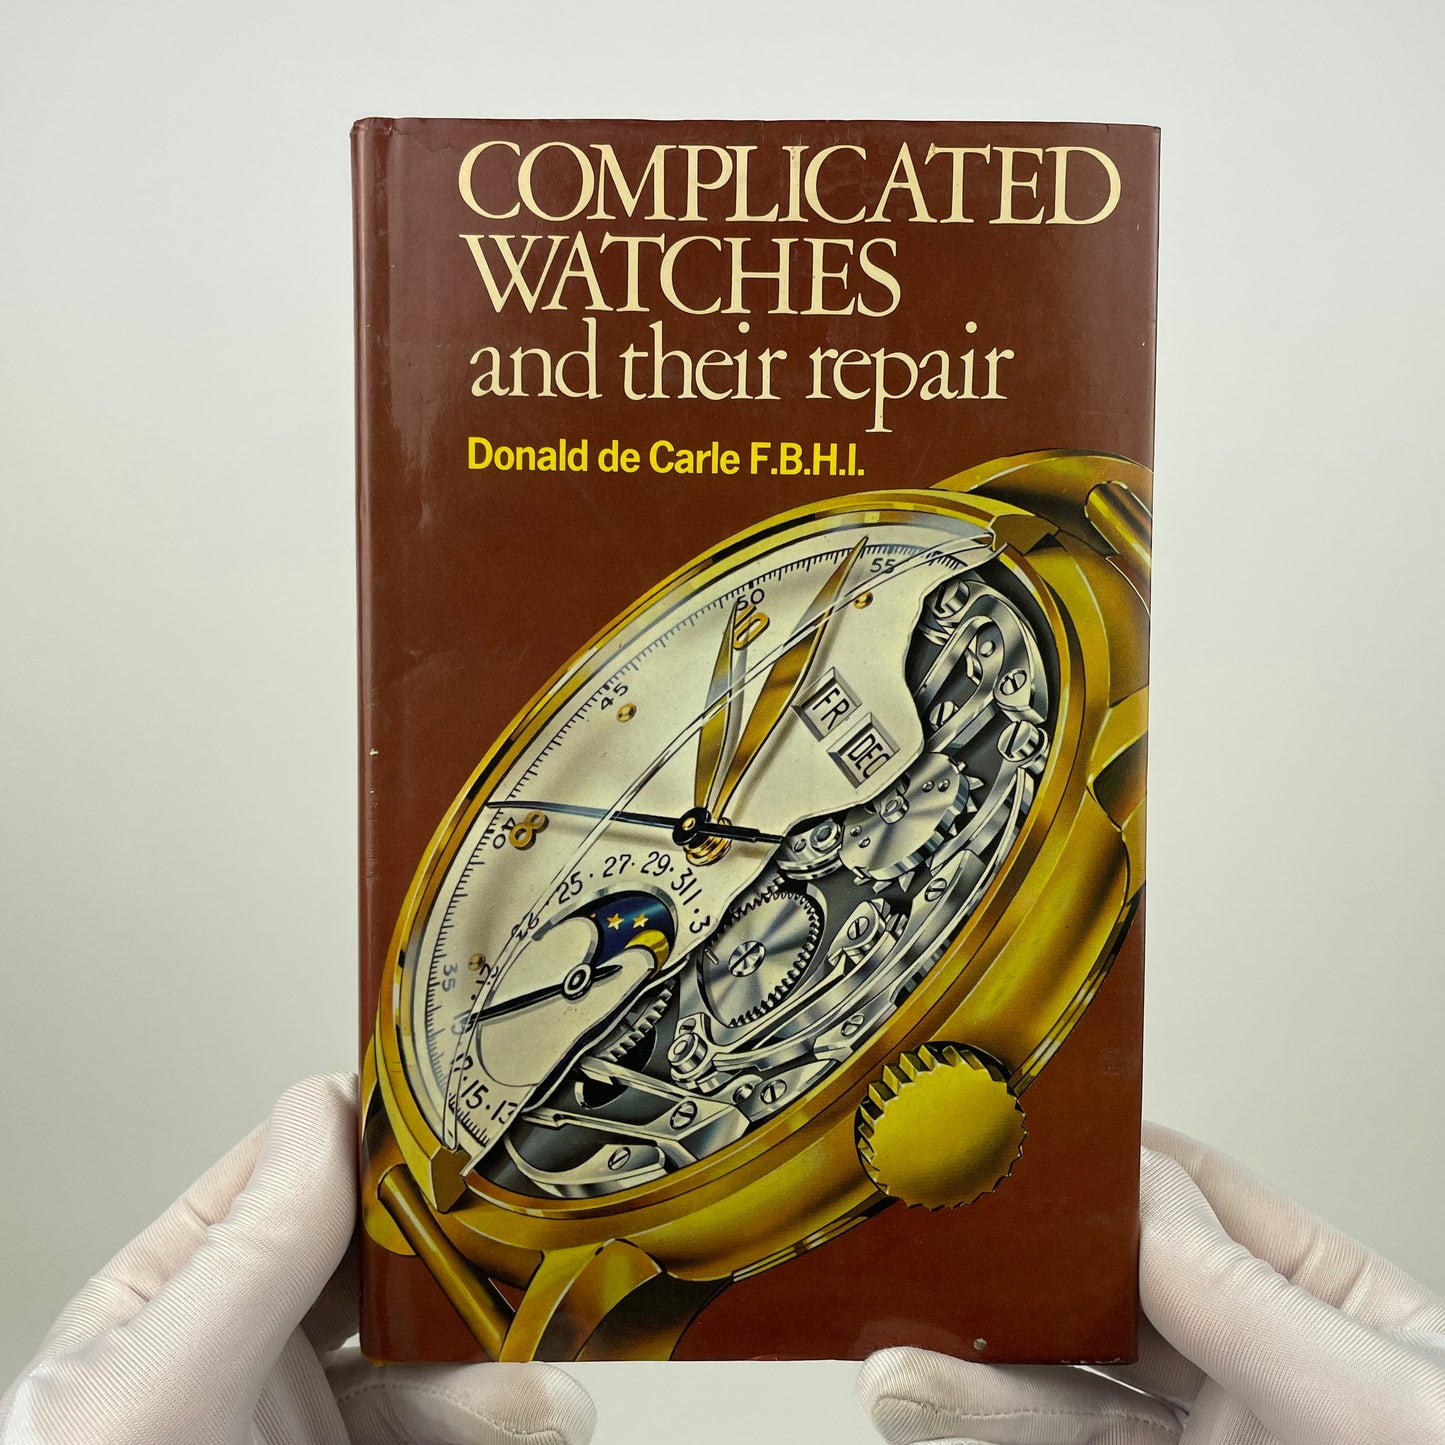 Complicated Watches and their repair